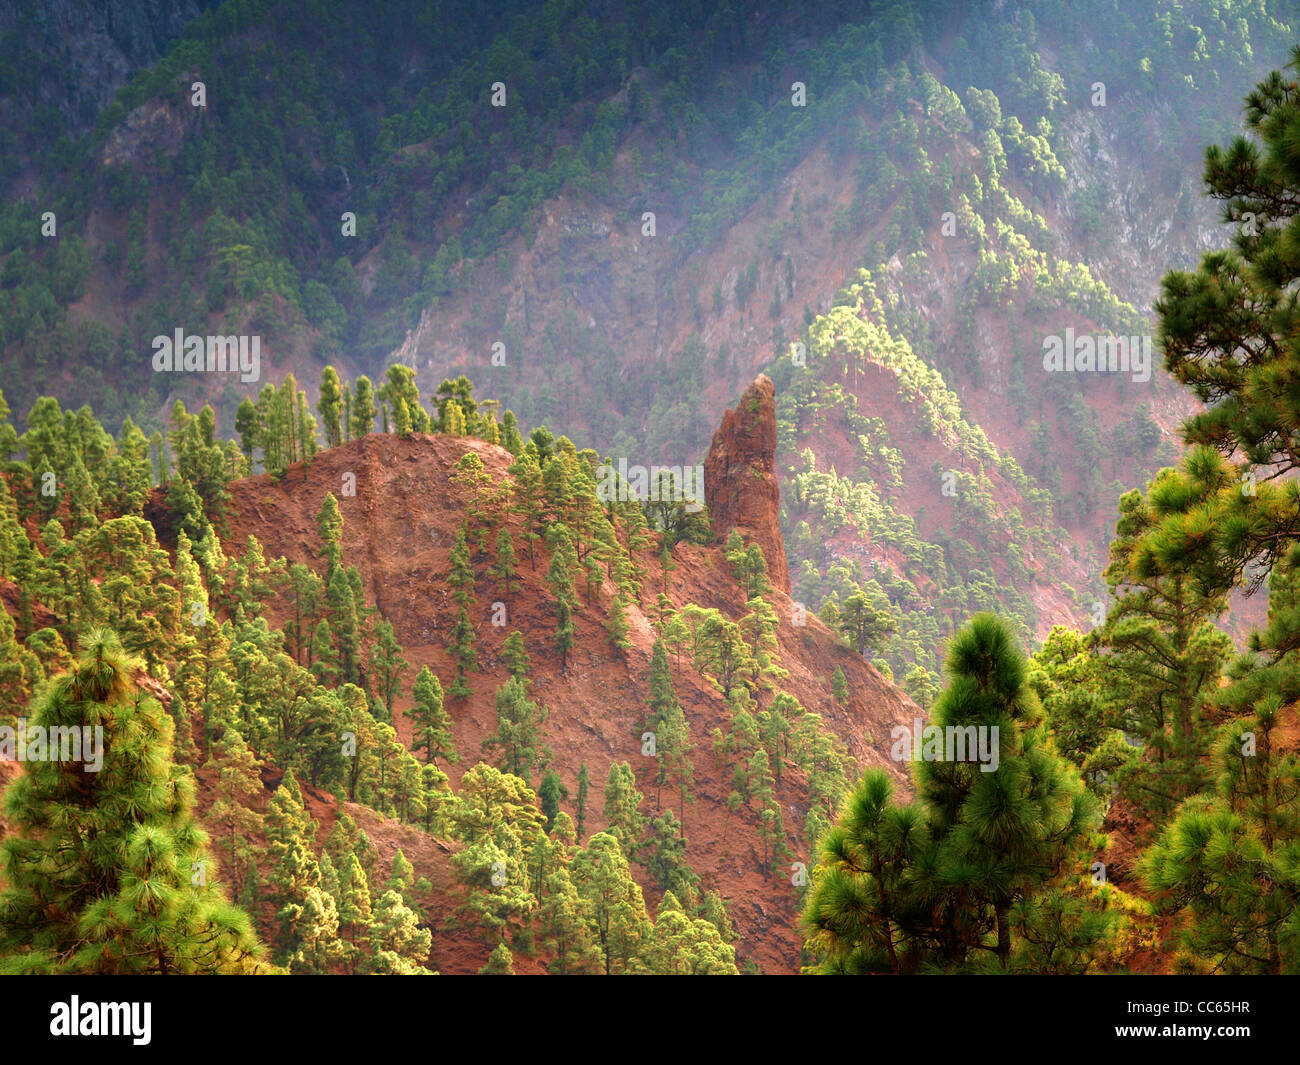 Forest clinging to slopes inside the volcanic crater on La Palma, Canary Islands, Spain Stock Photo